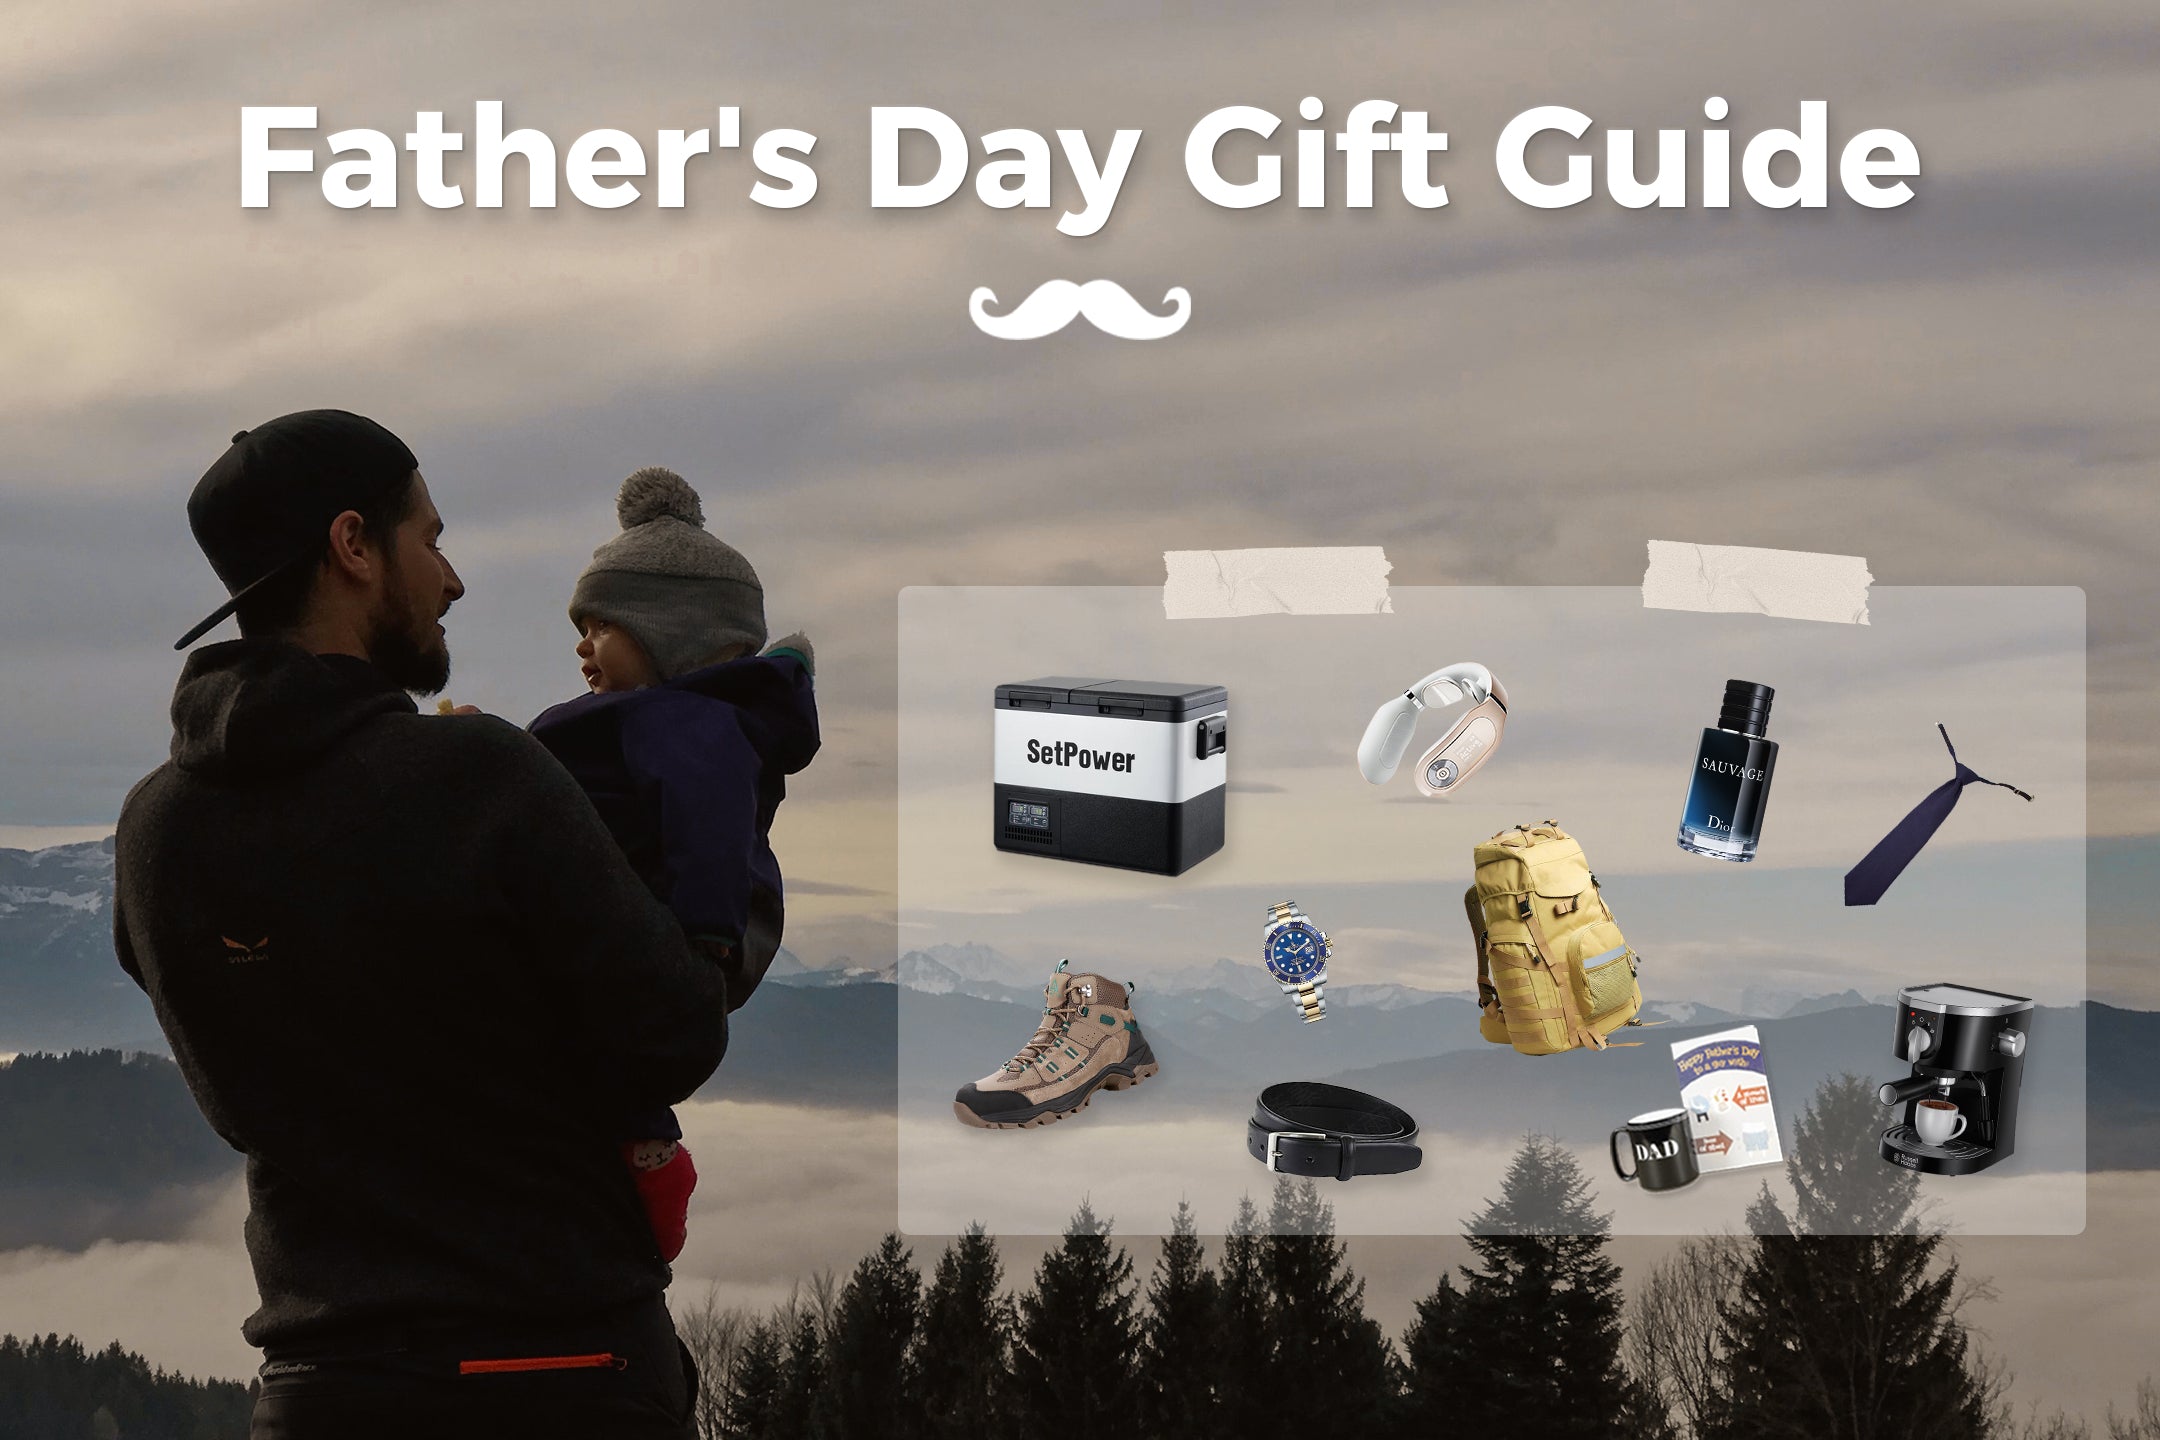 2023 Father’s Day Gift Guide: Celebrate and Make Memories